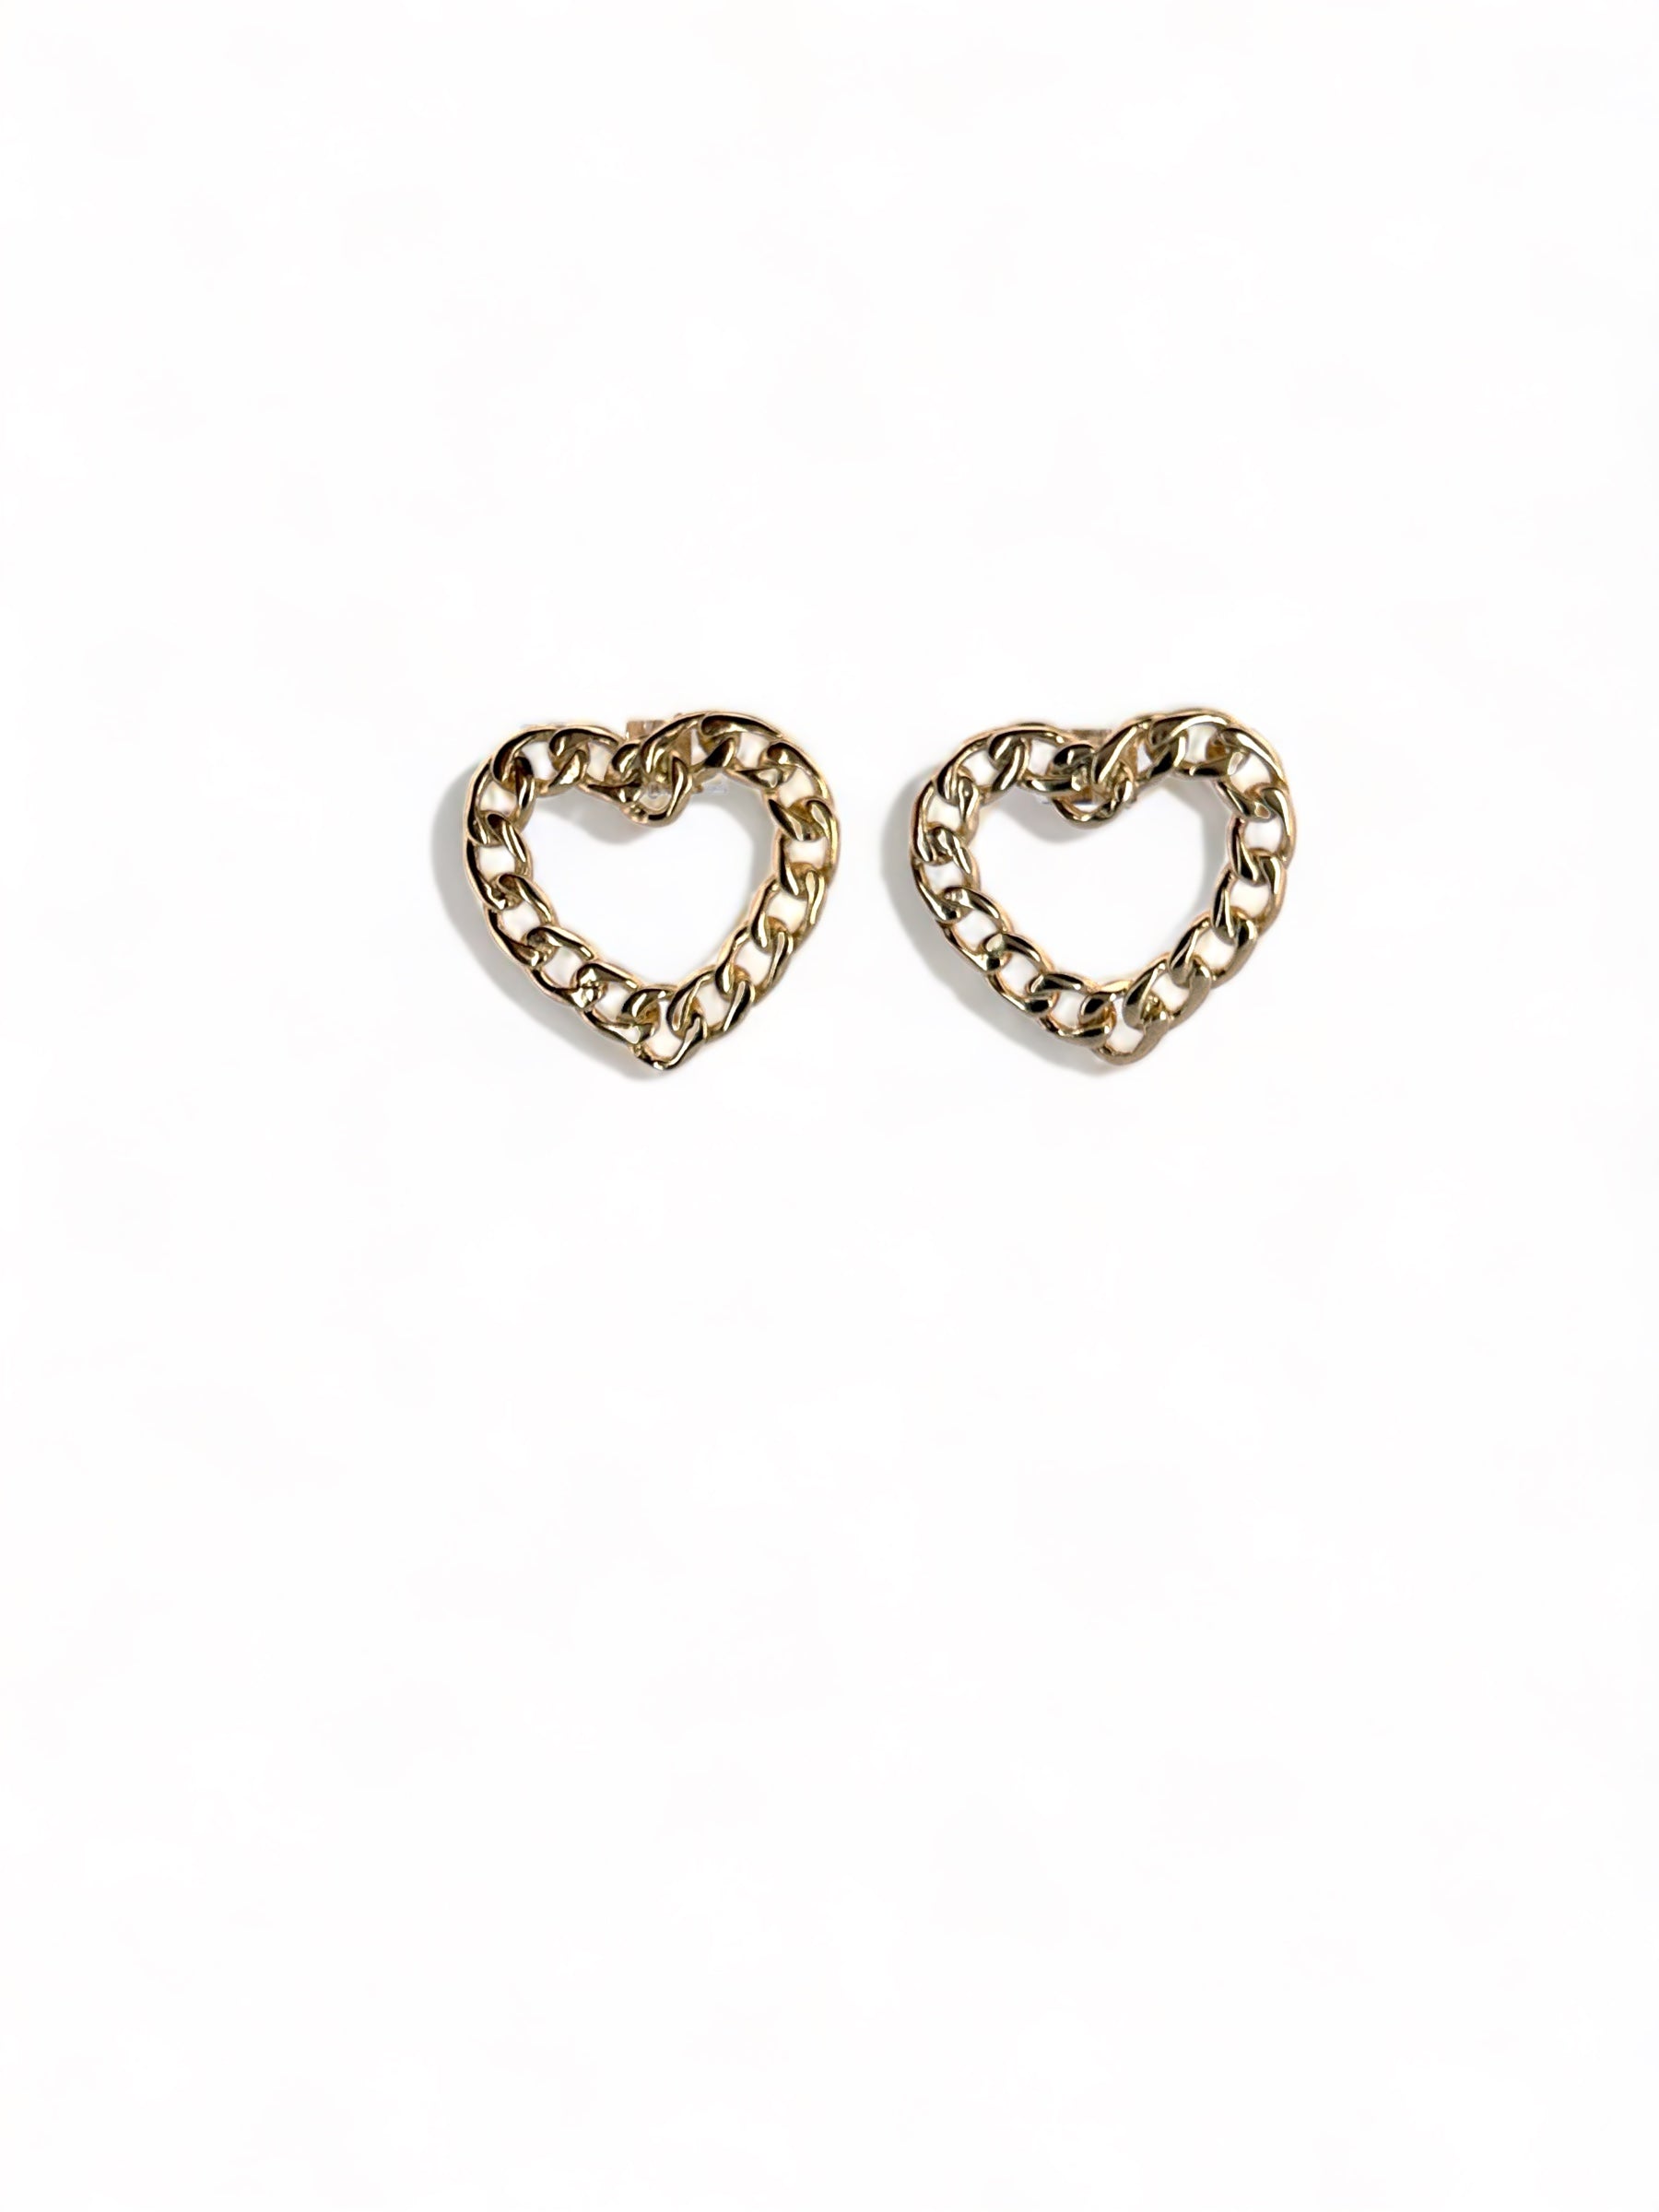 Valentine’s Day gitfts for girlfriend under $100 perfect chained hearts earrings featuring gold construction, they come in a gorgeous pink box. 